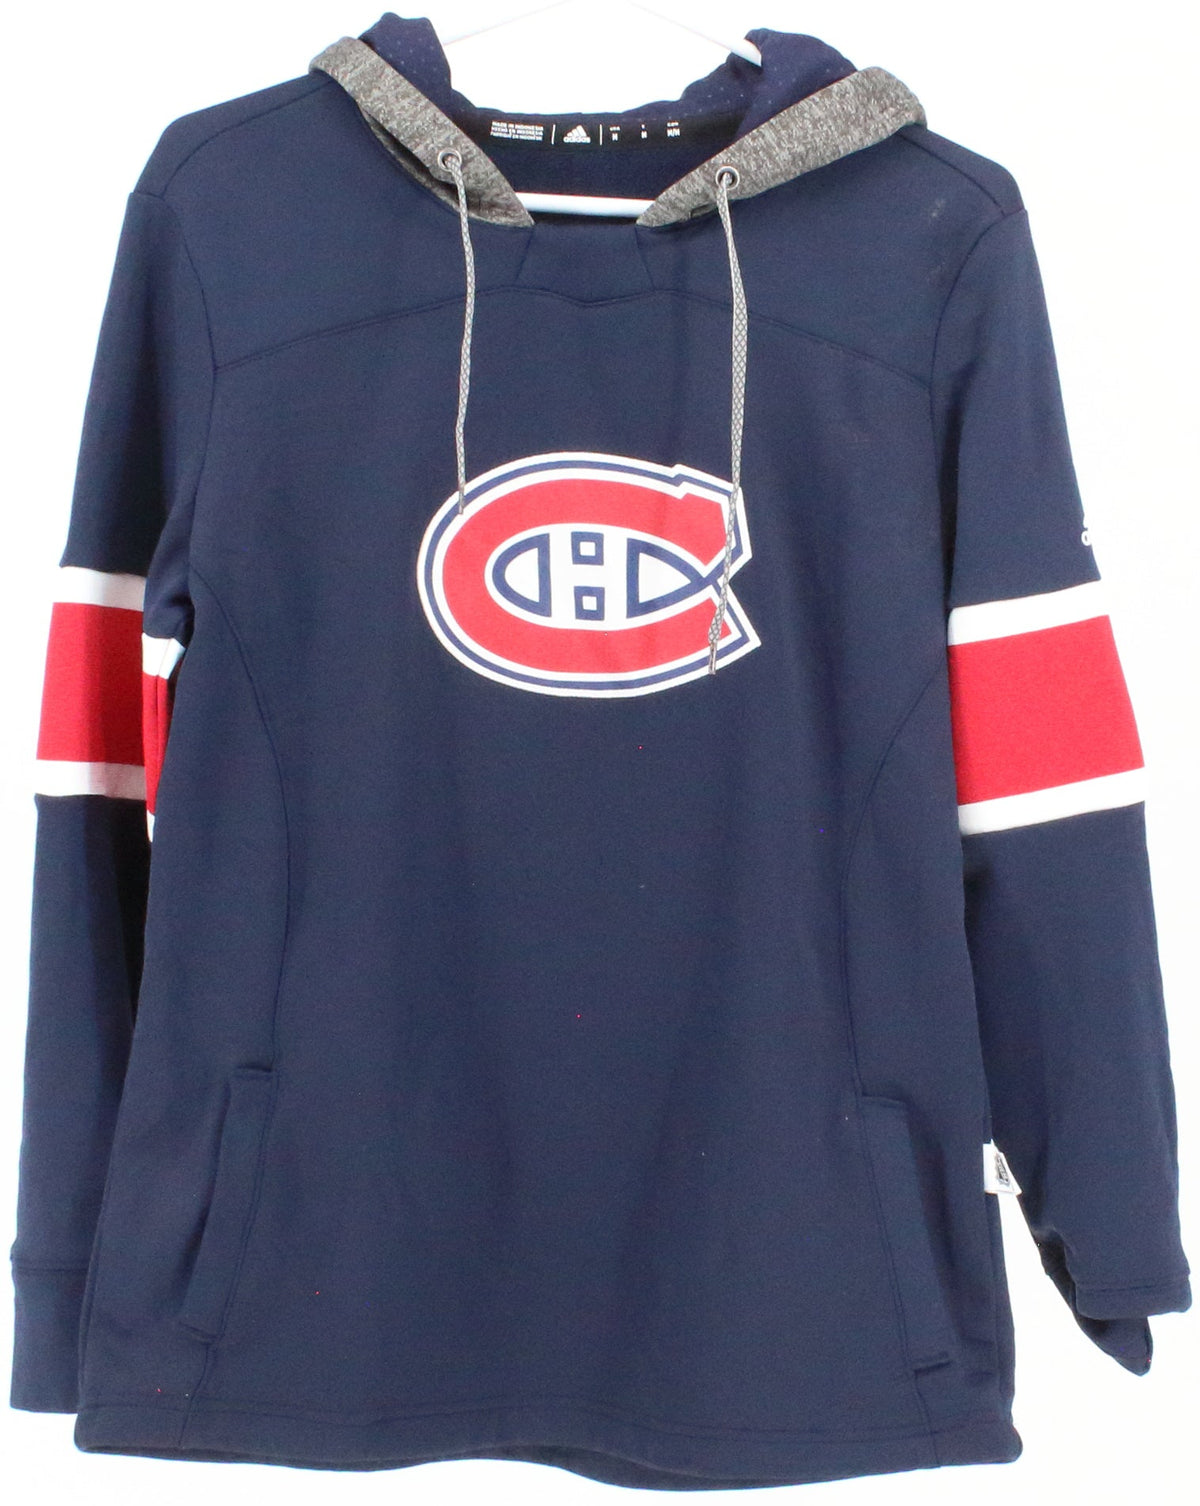 Adidas NHL Montreal Canadiens Navy Blue and Red Hooded Sweatshirt